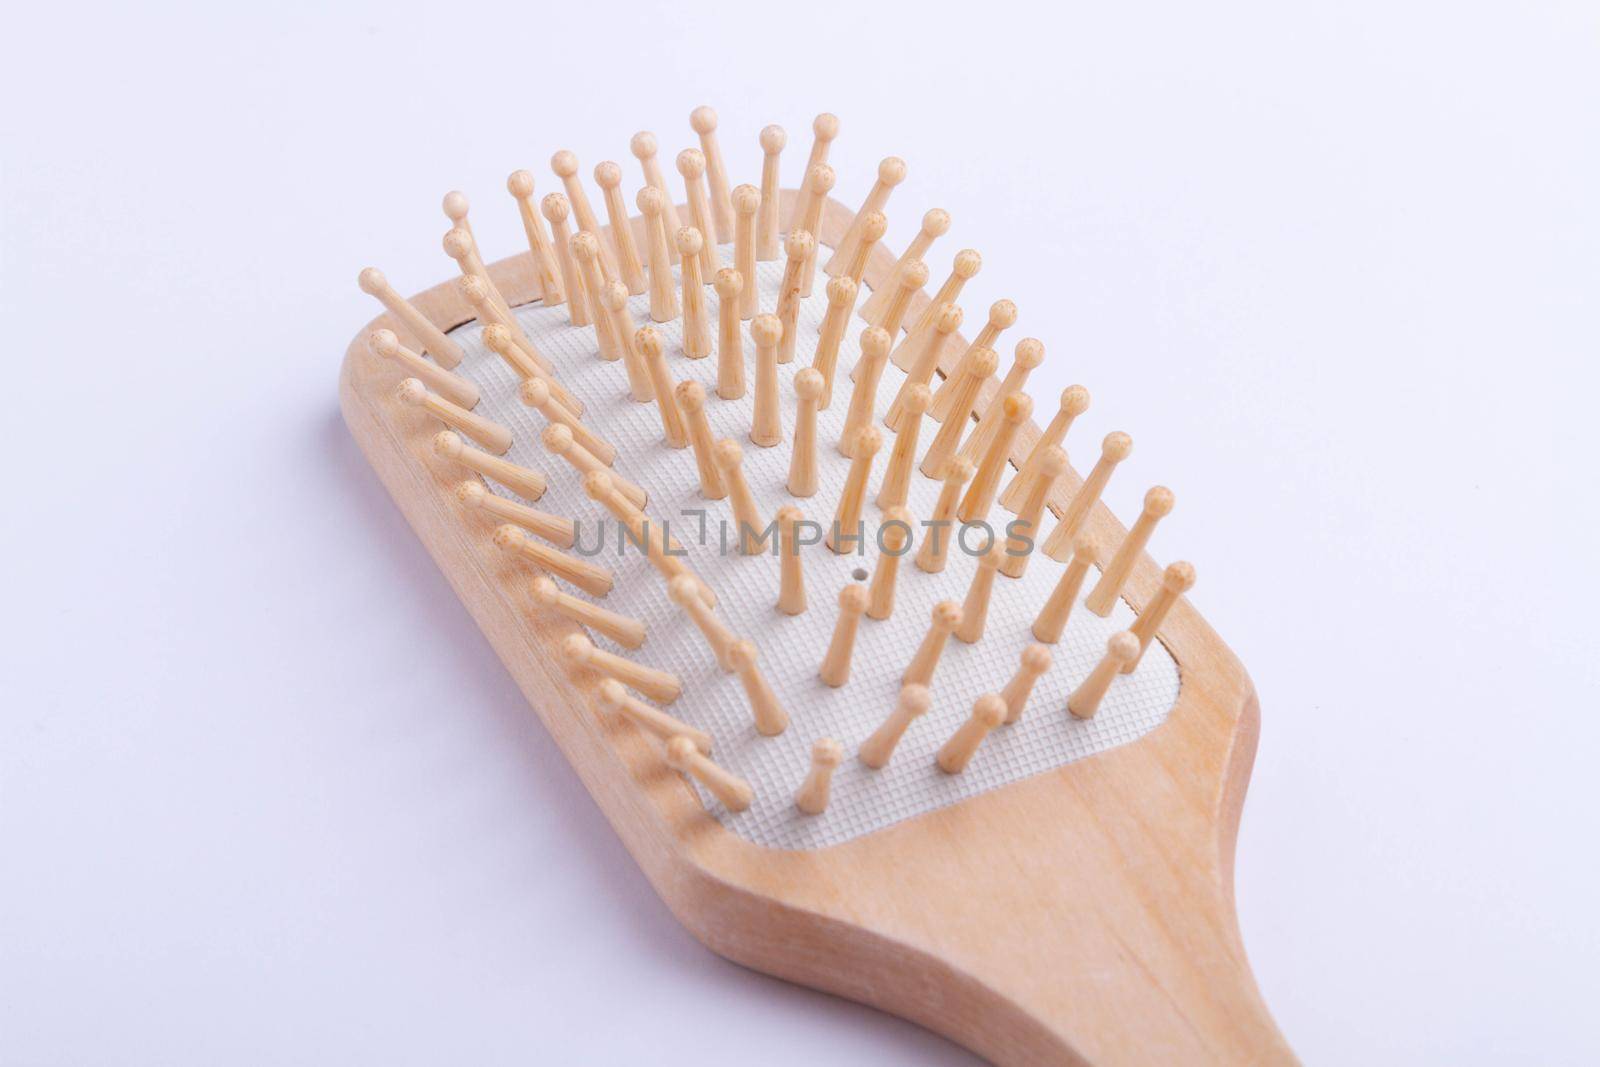 Massage comb to stimulate hair growth. Comb on isolated background. Beauty and hair care.